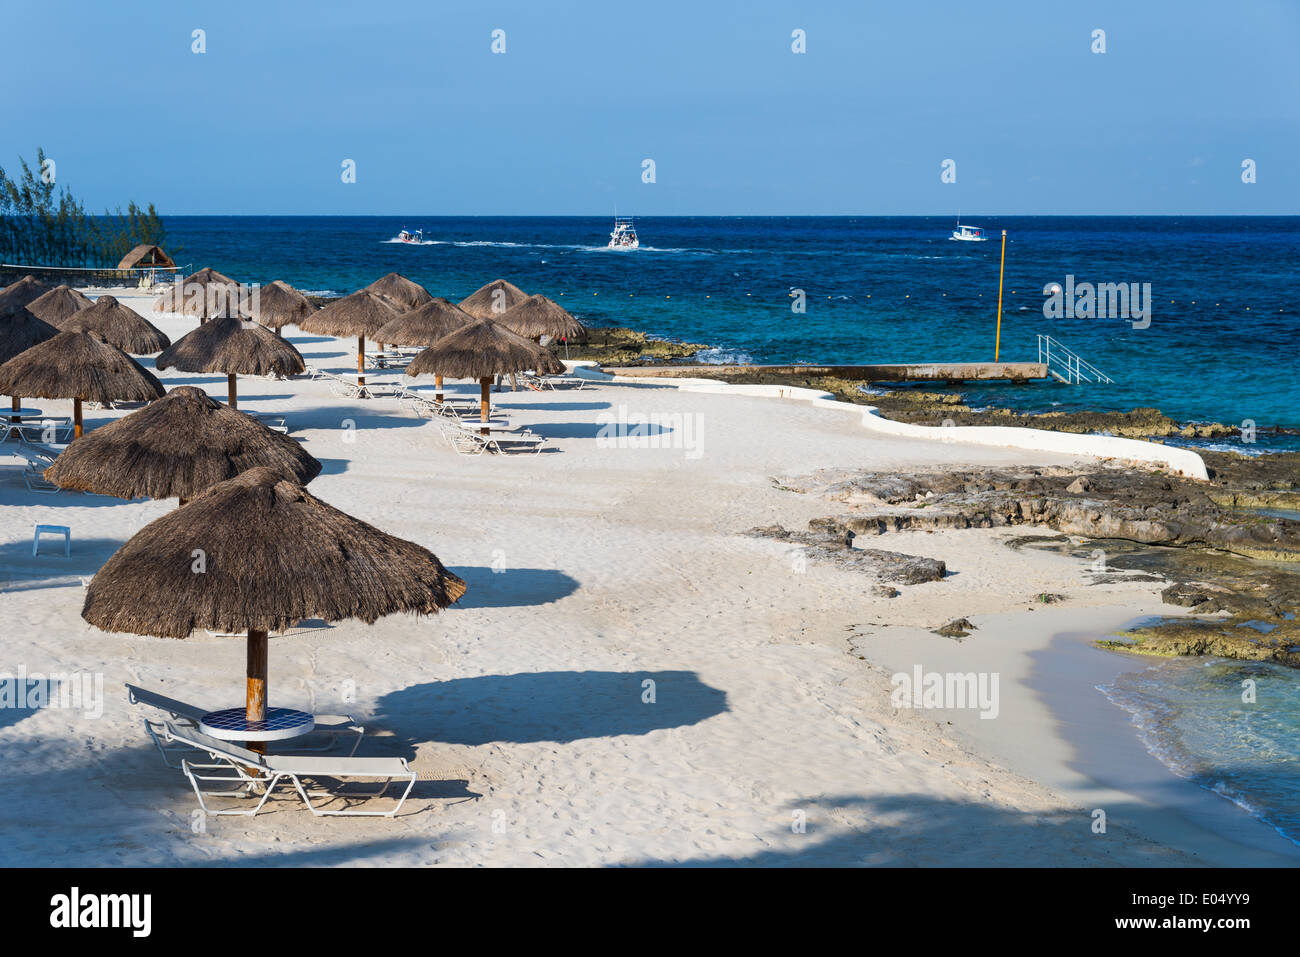 Thatched umbrellas scattered on a beach resort. Cozumel, Mexico. Stock Photo